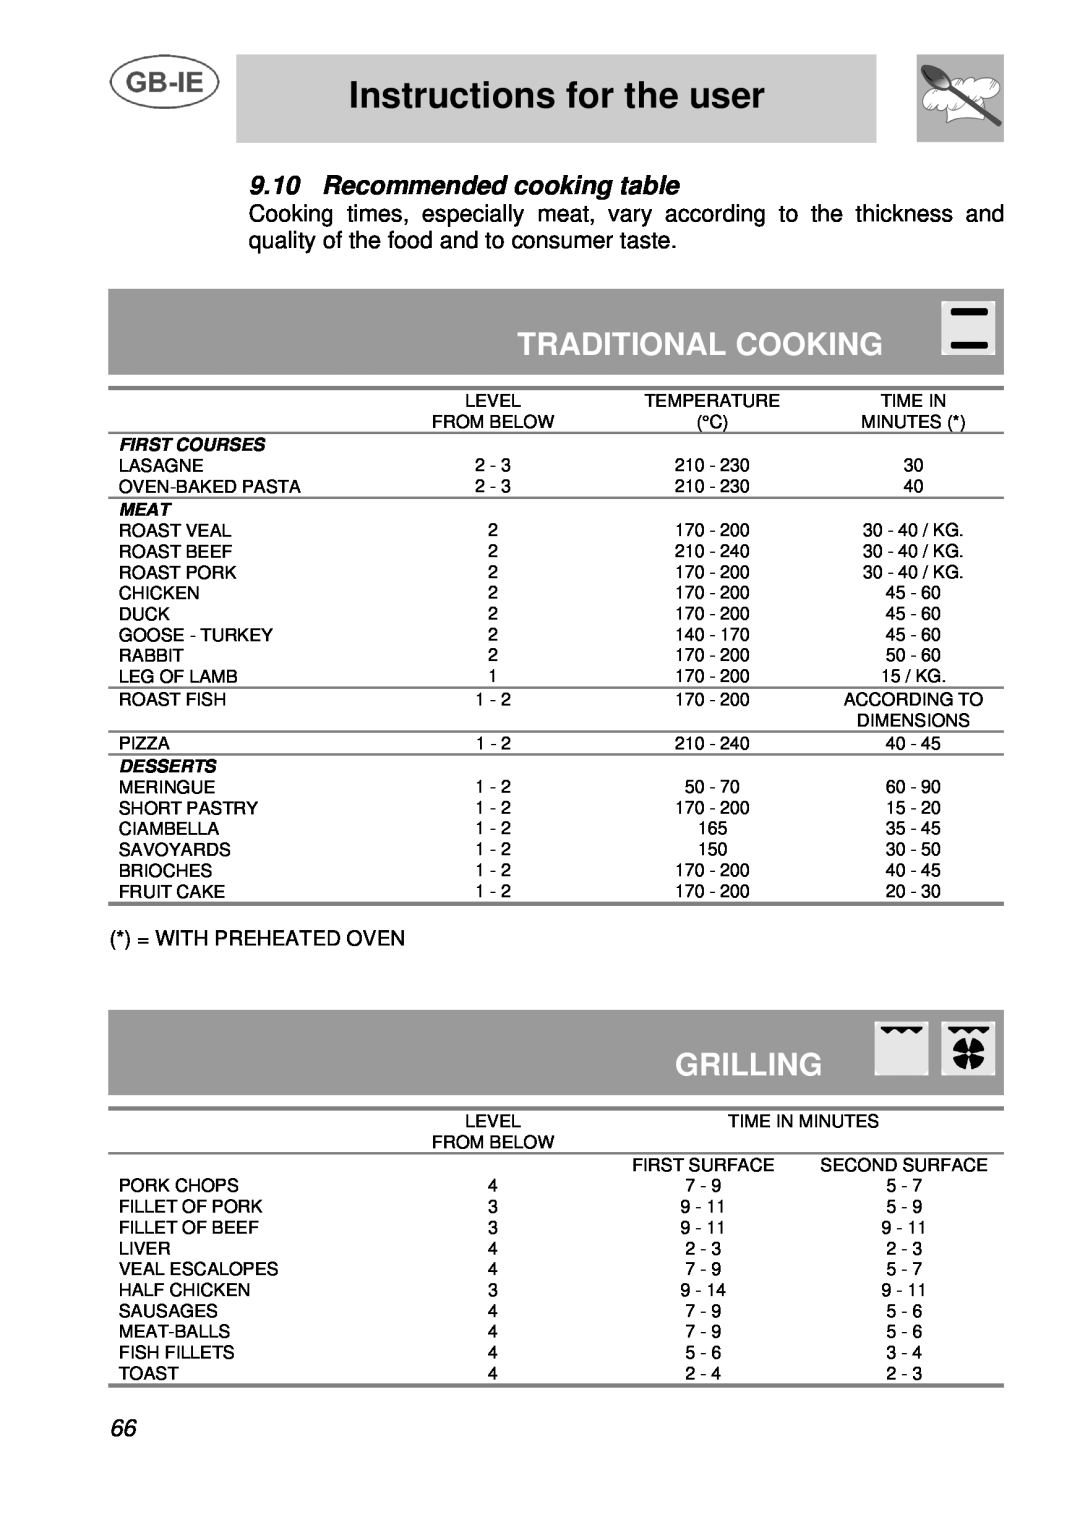 Smeg A3 Traditional Cooking, Grilling, Recommended cooking table, Instructions for the user, First Courses, Meat, Desserts 